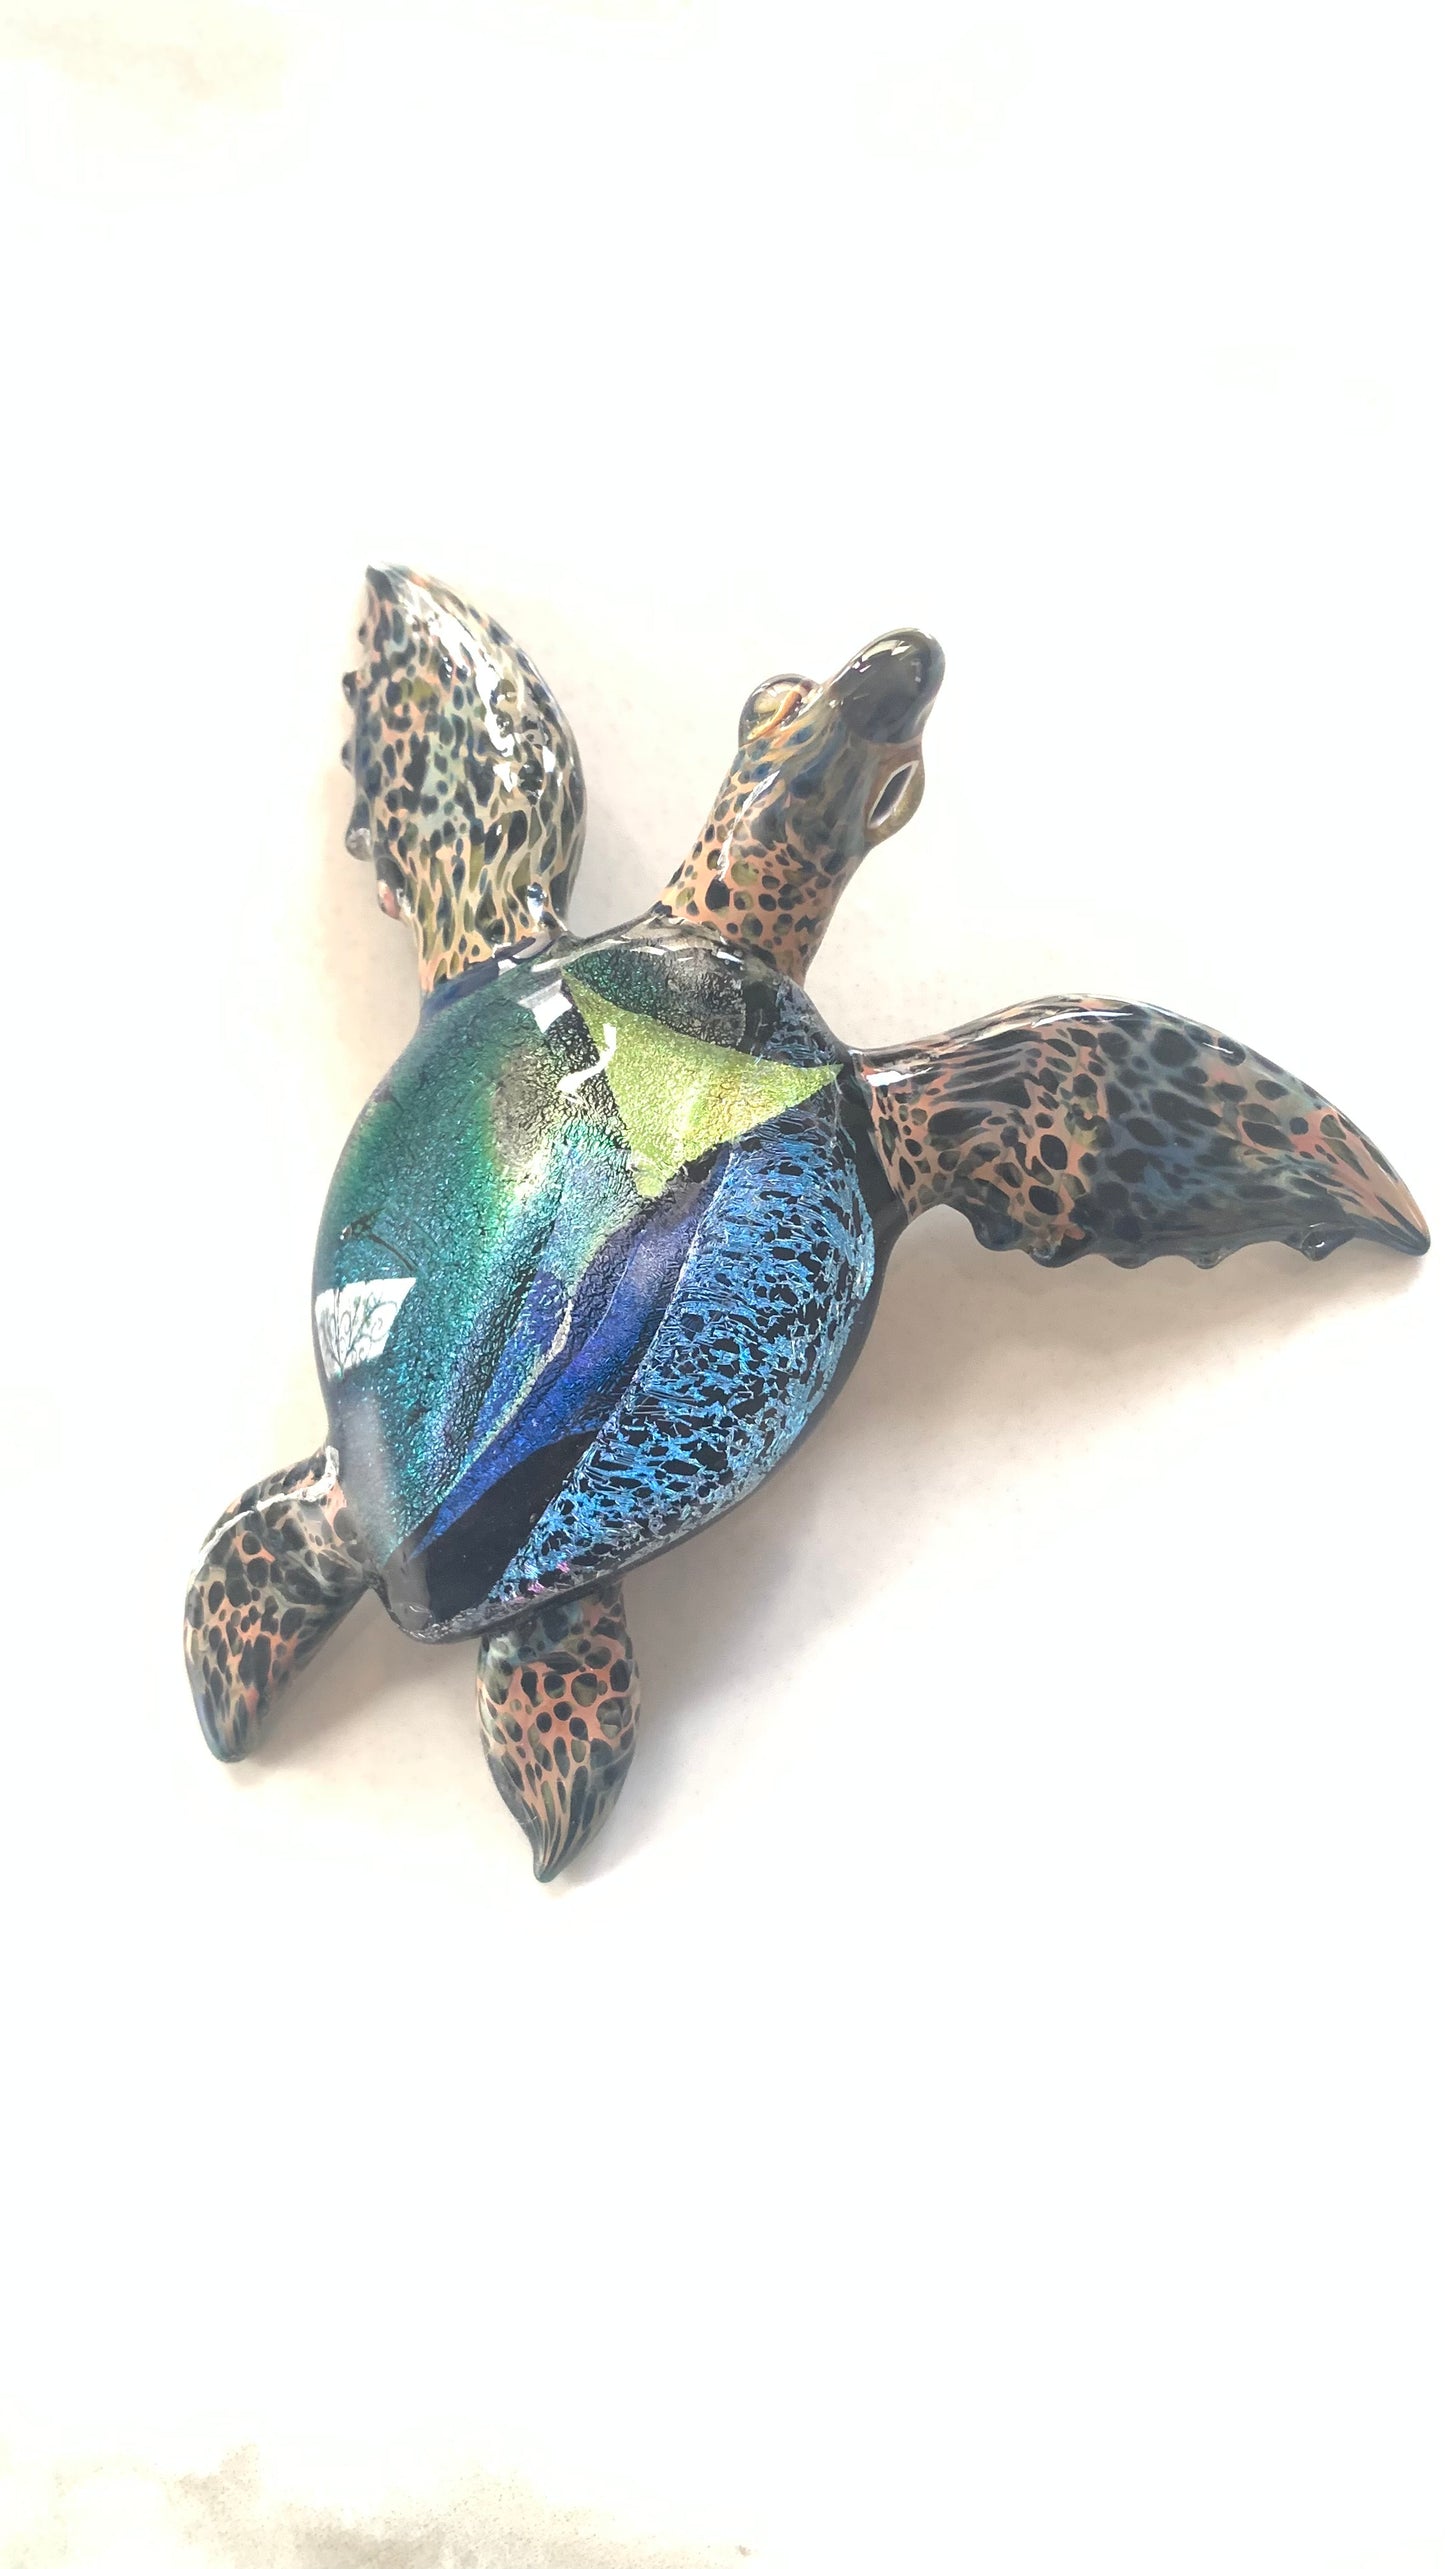 Elegant Handblown Glass Sea Turtle Sculpture with Stunning Dichroic Accents Desk Art Decor for the Office